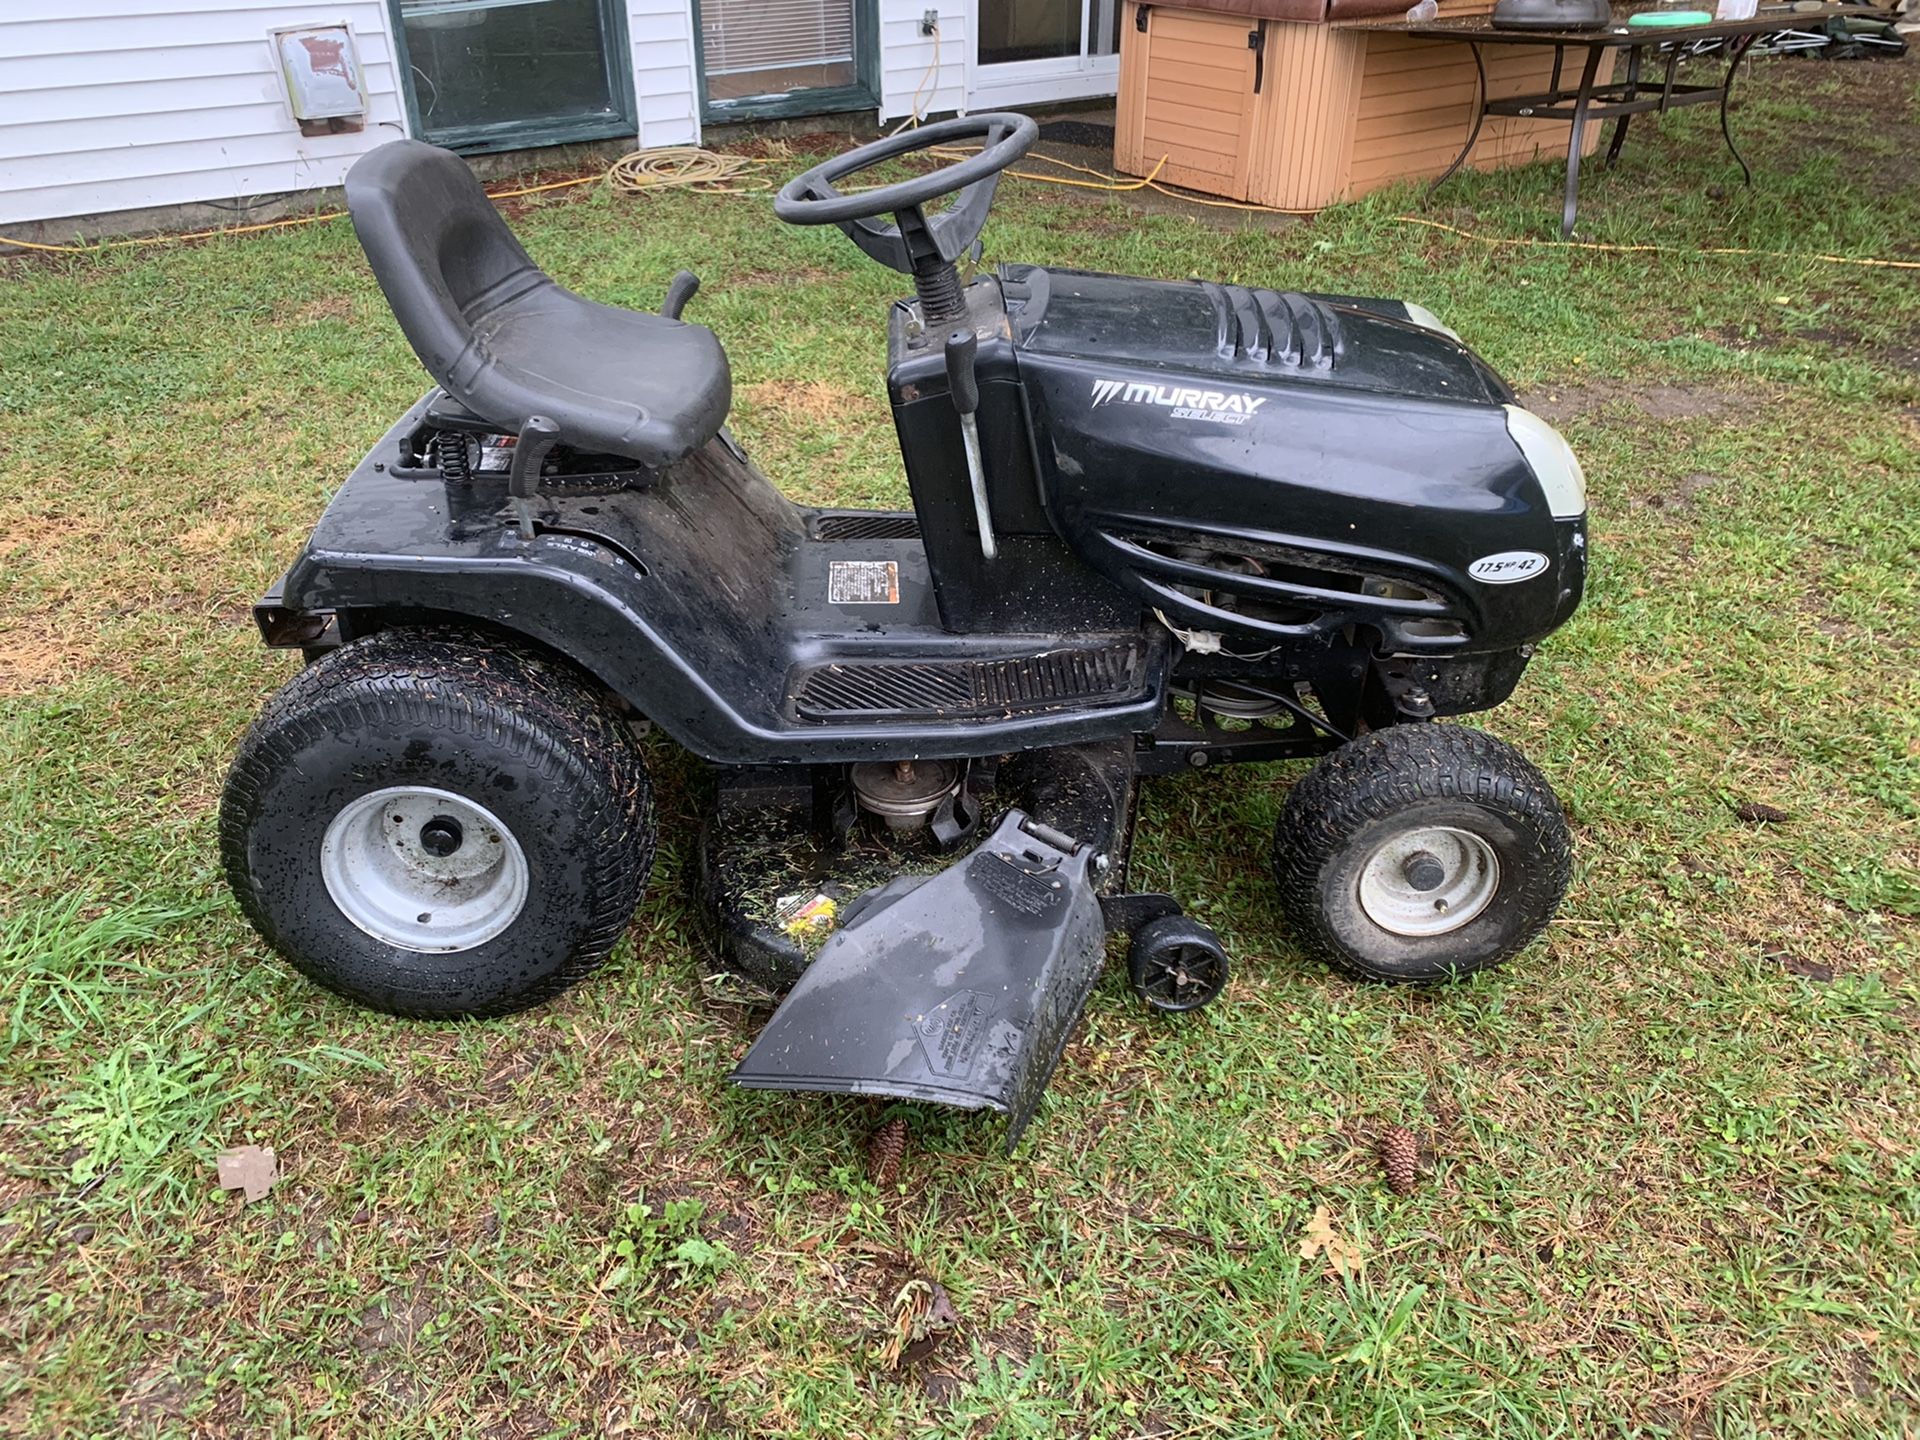 ***REDUCED*** Murray Select Riding Lawn Mower, 42” deck, 17.5hp B&S engine